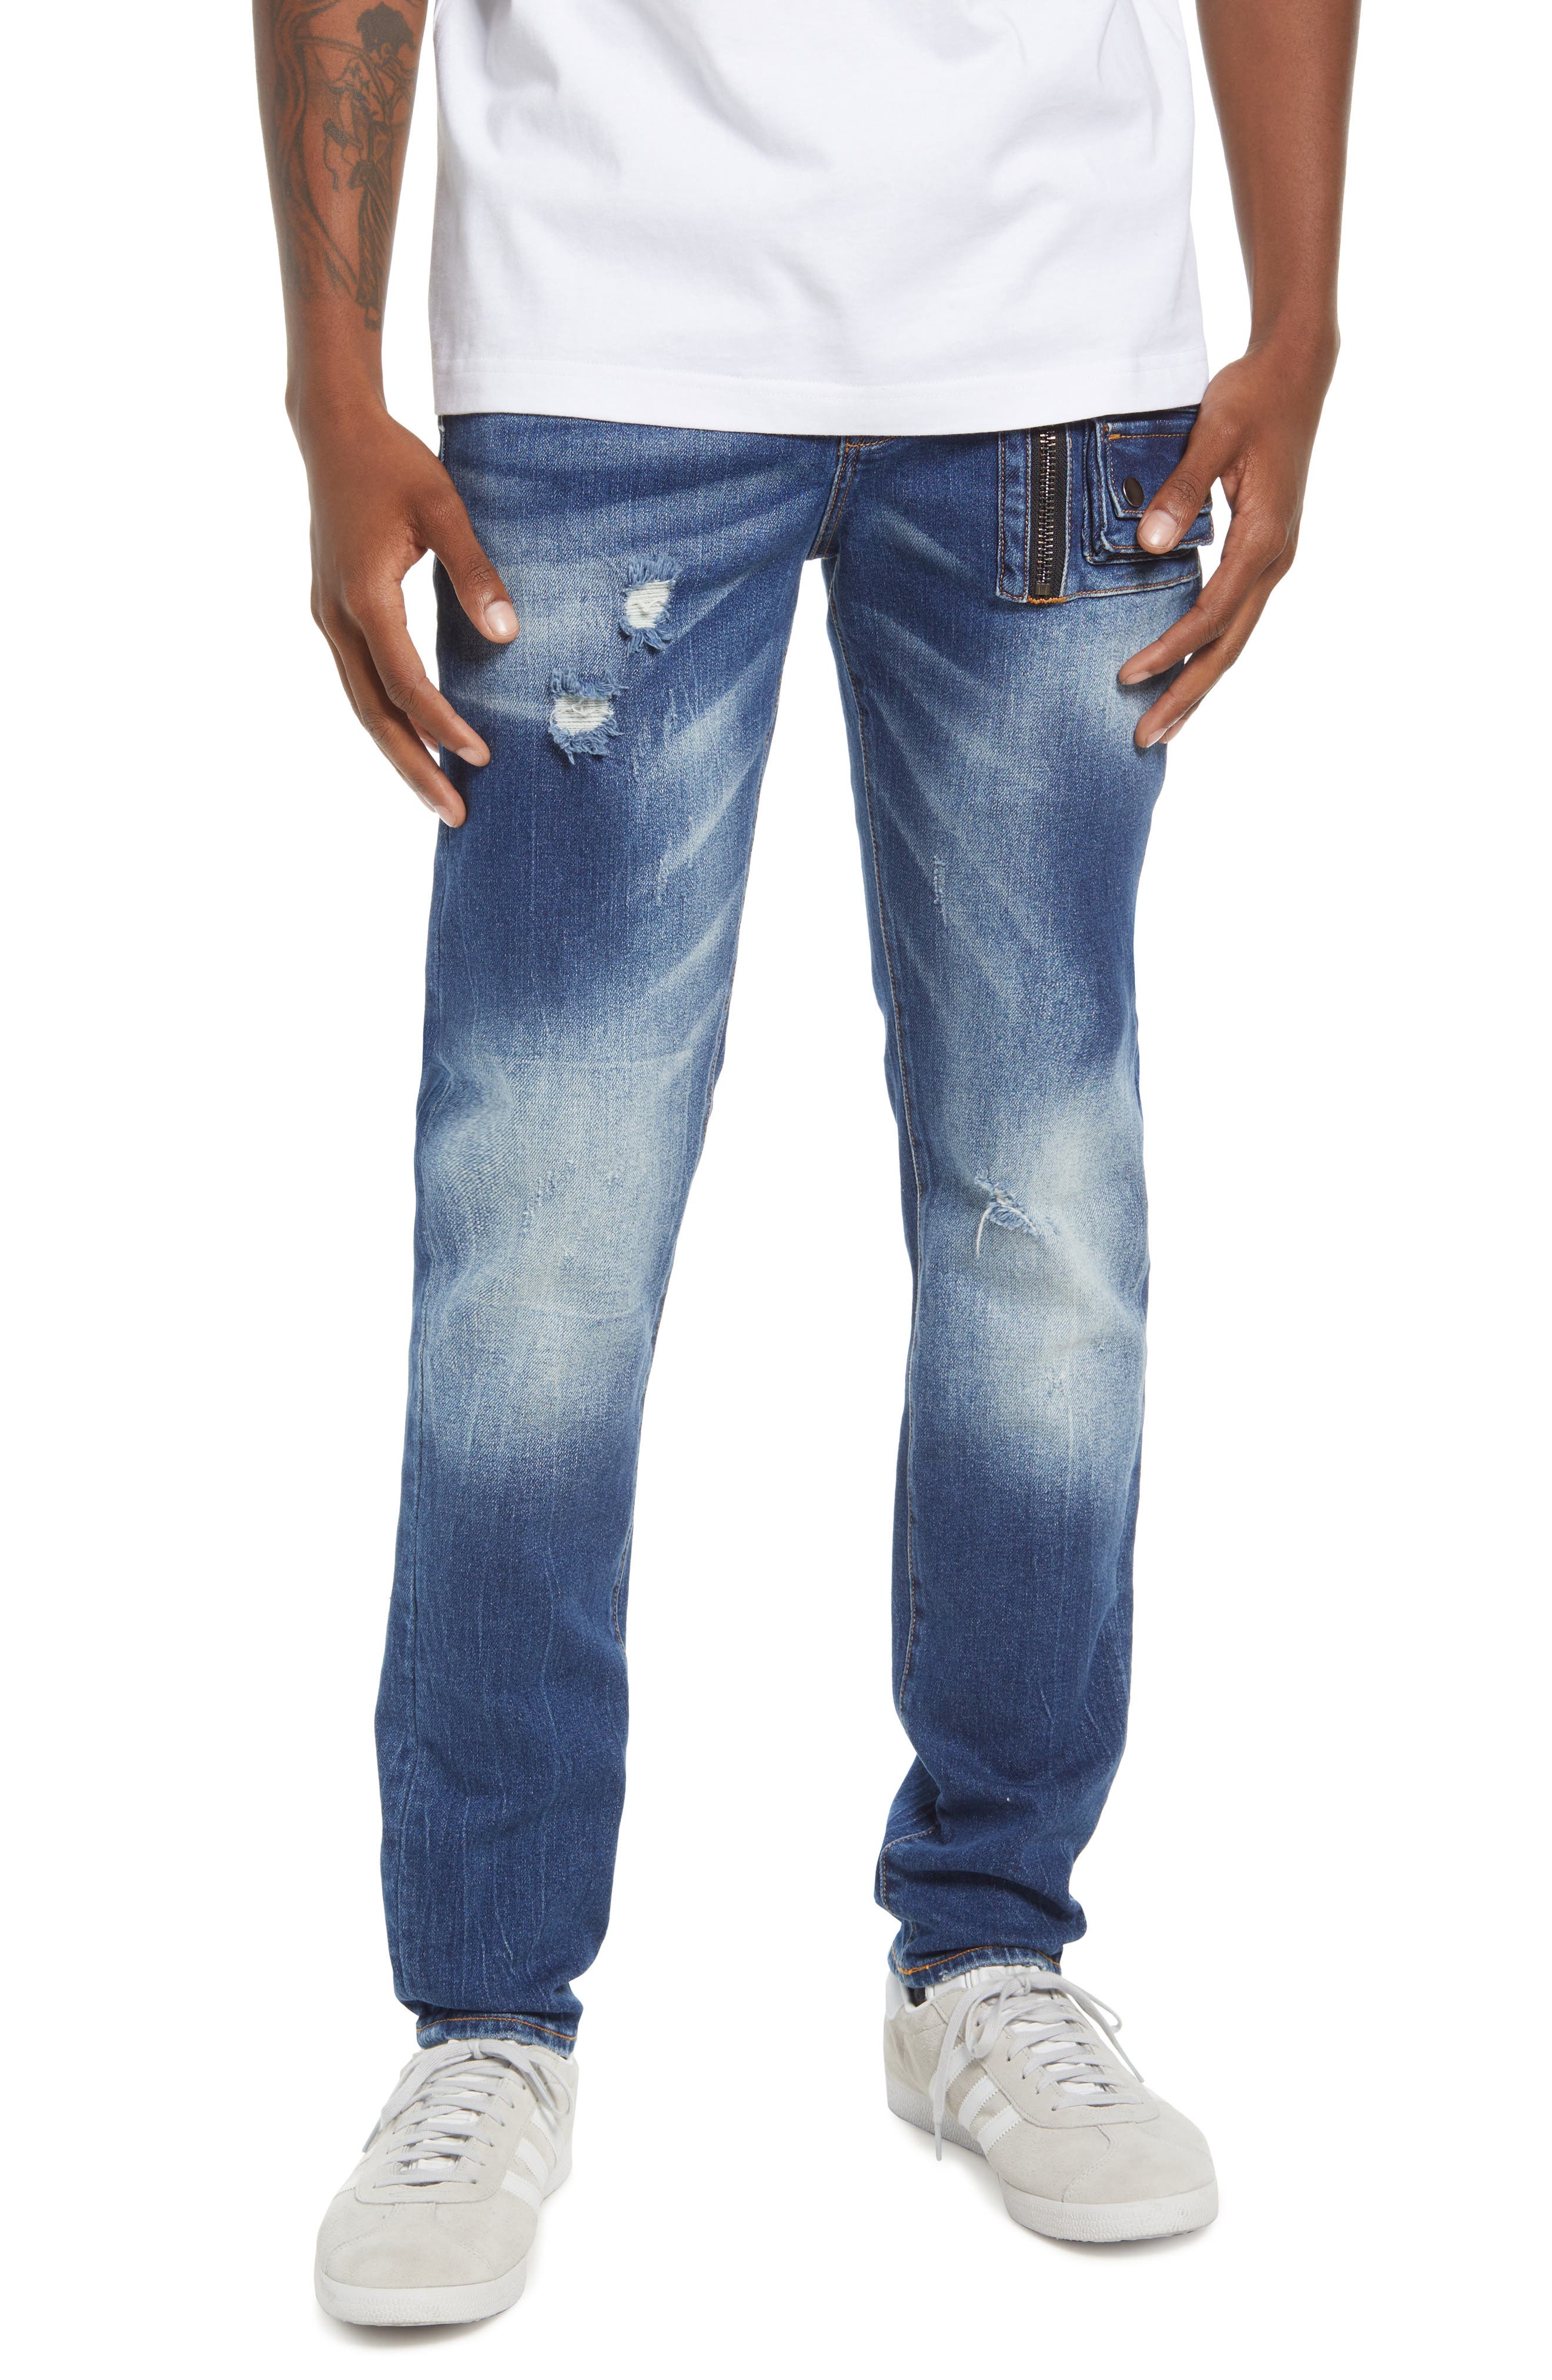 Billionaire Boys Club Men's Voyager Jeans in Draco at Nordstrom, Size 32